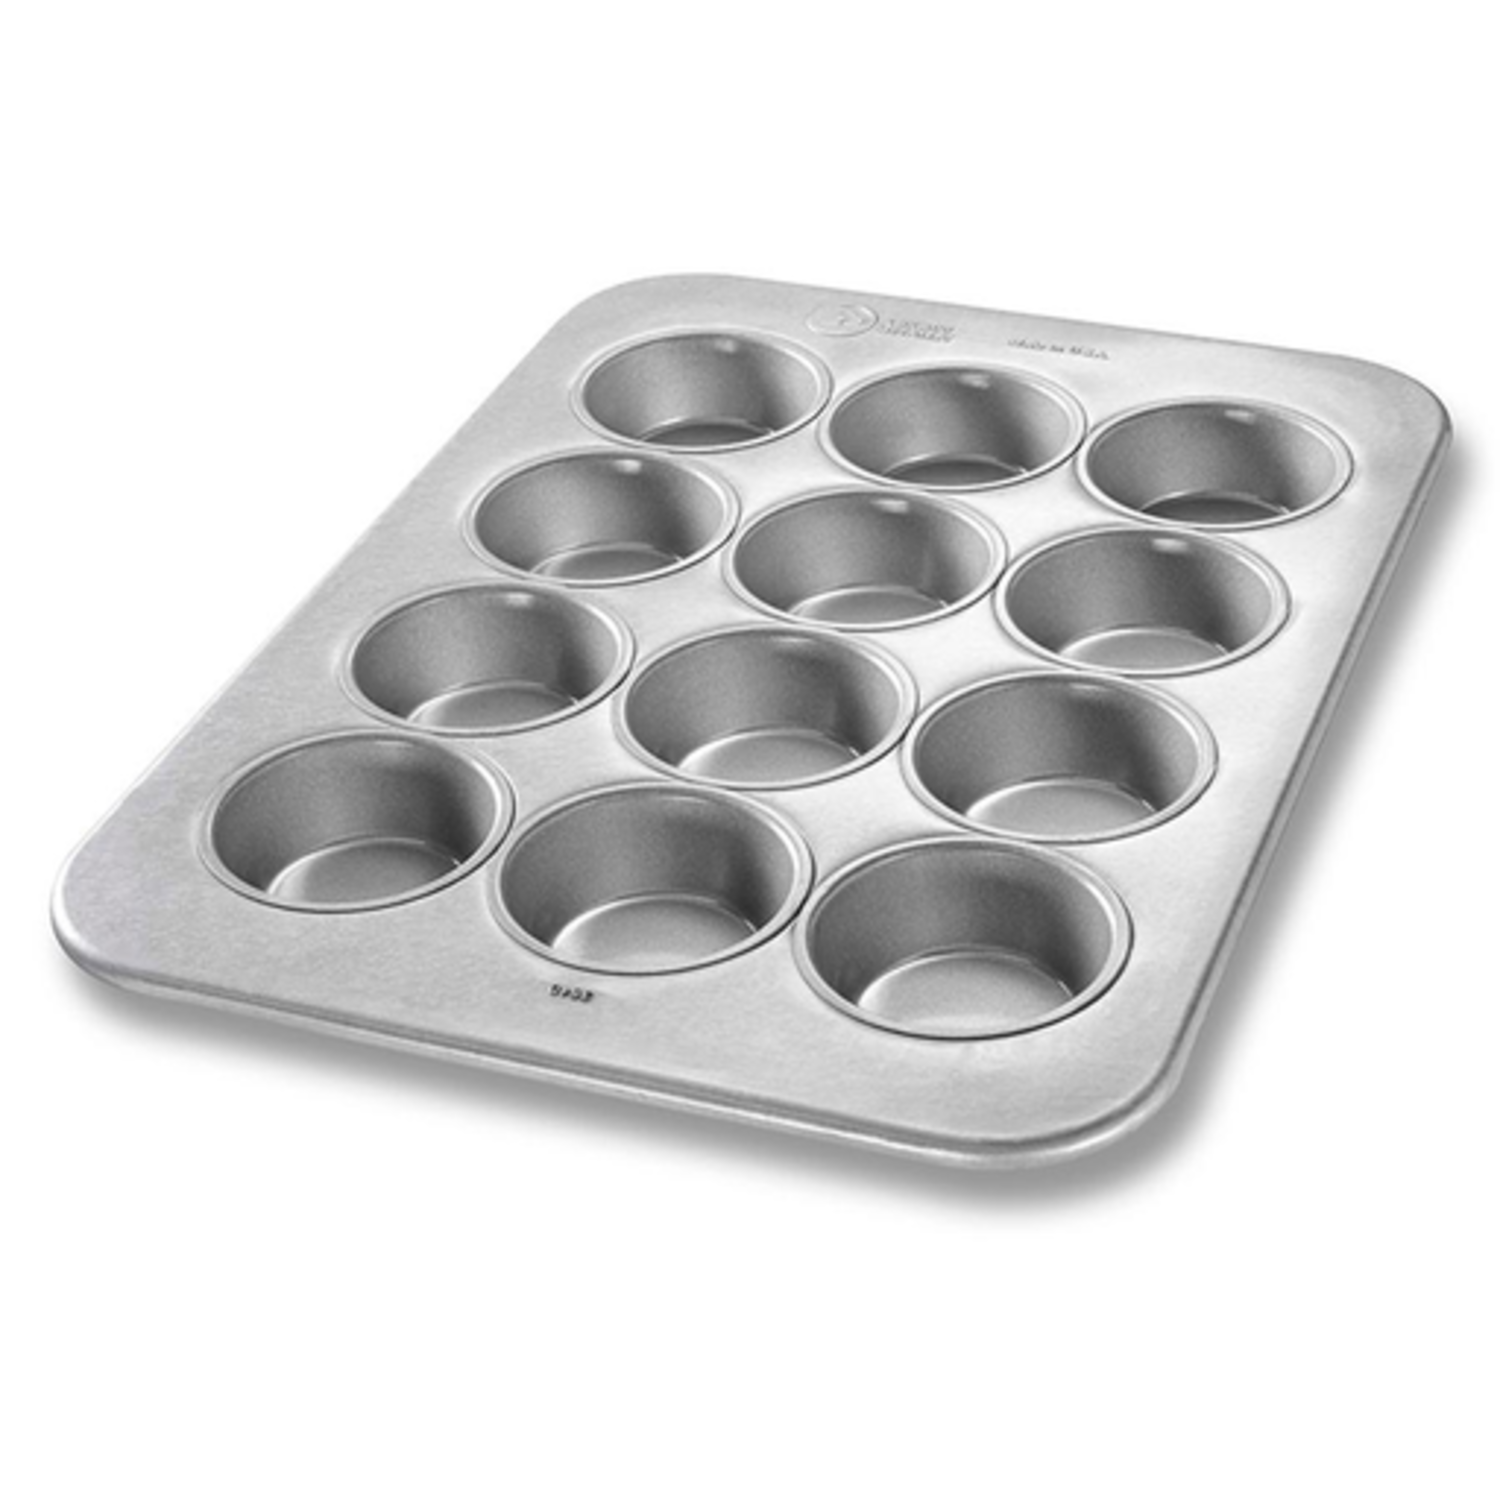 Uncoated Muffin Pan, 12 cavity - Whisk